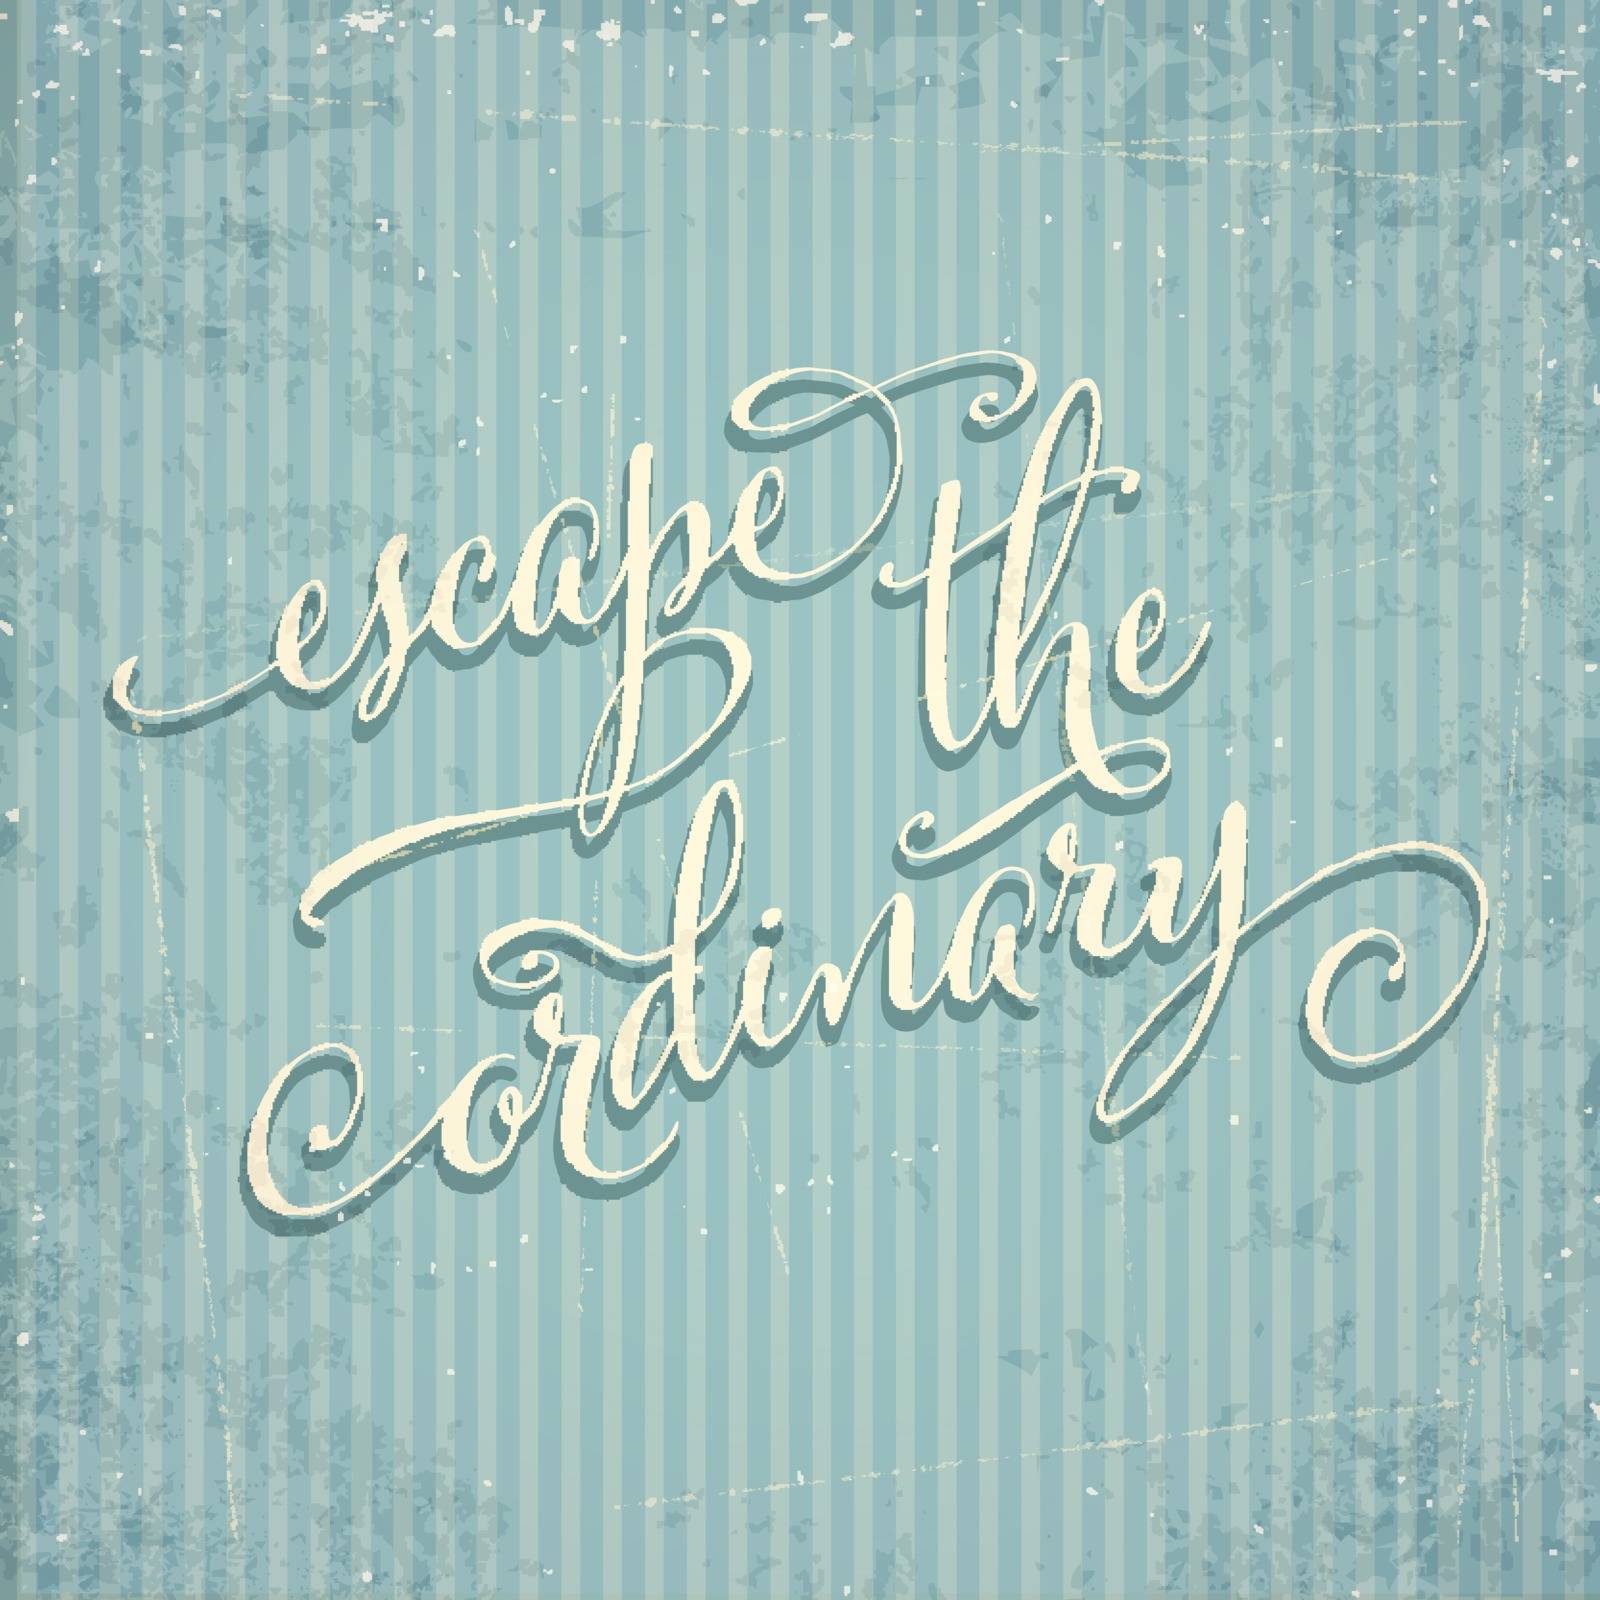 Escape the ordinary- hand drawn motivational lettering phrase on by balasoiu